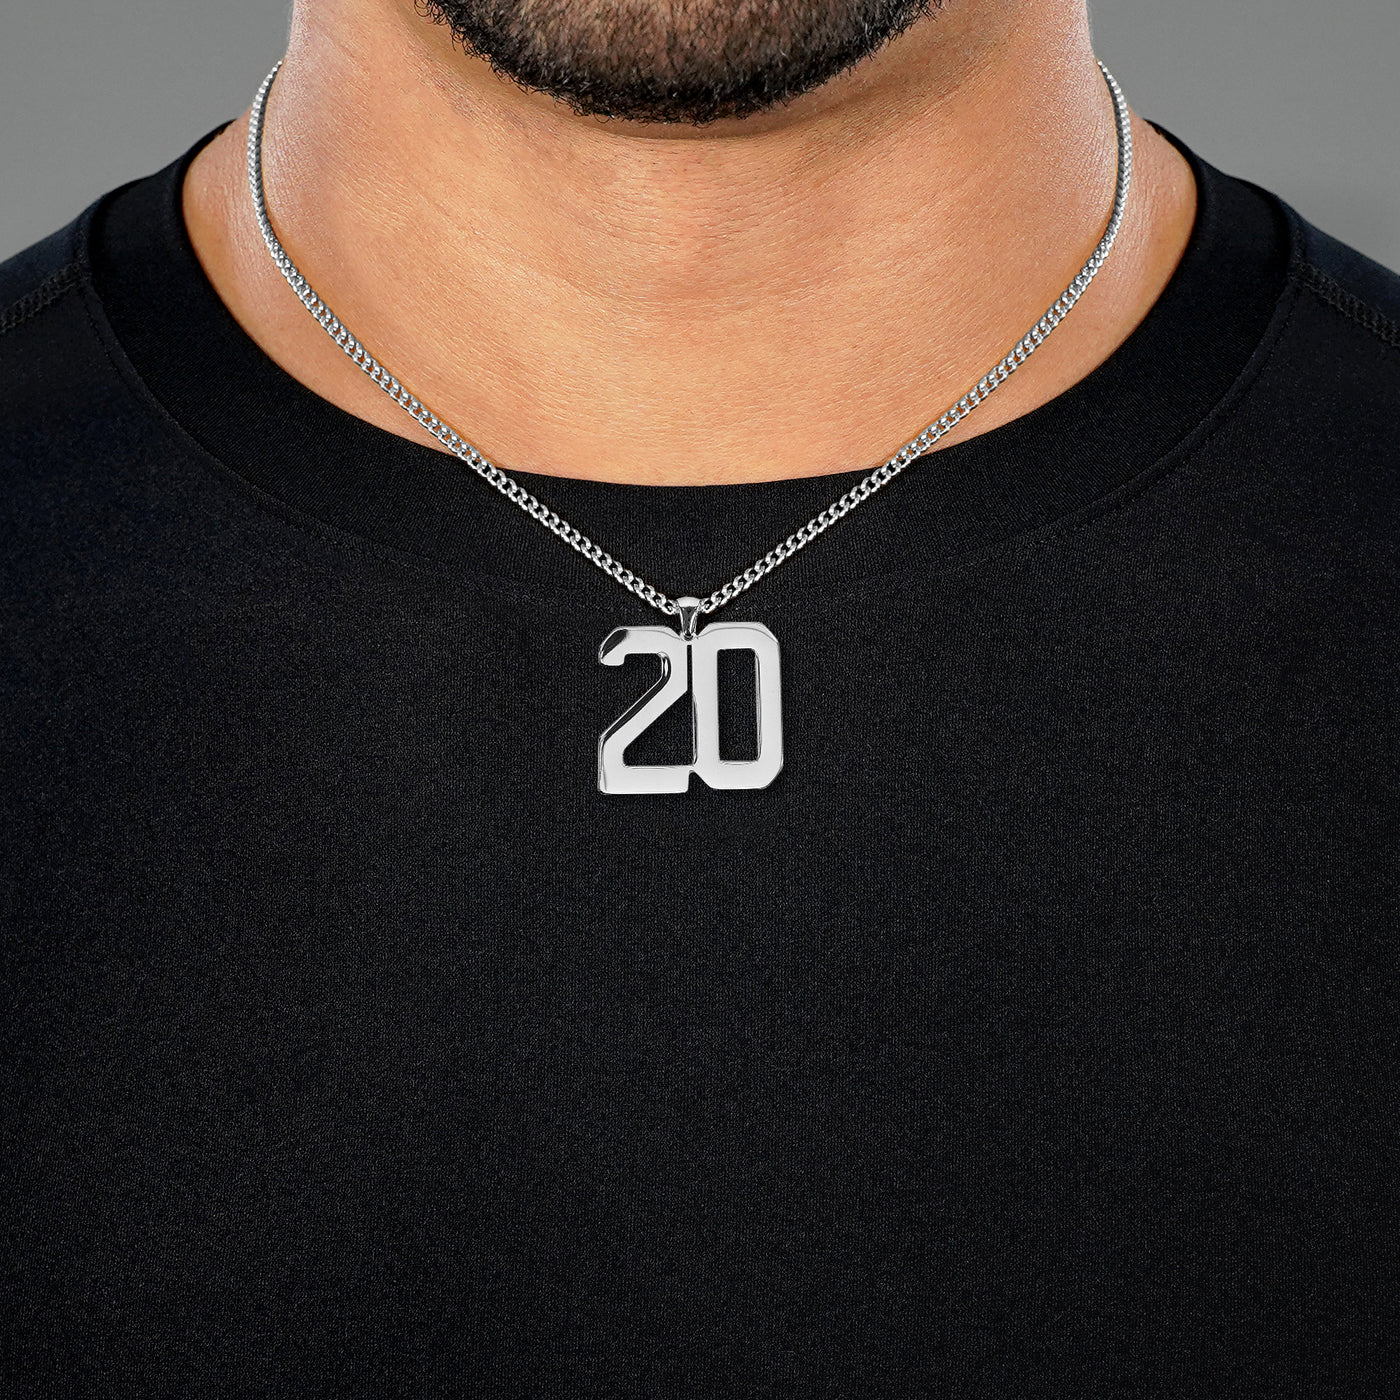 20 Number Pendant with Chain Necklace - Stainless Steel